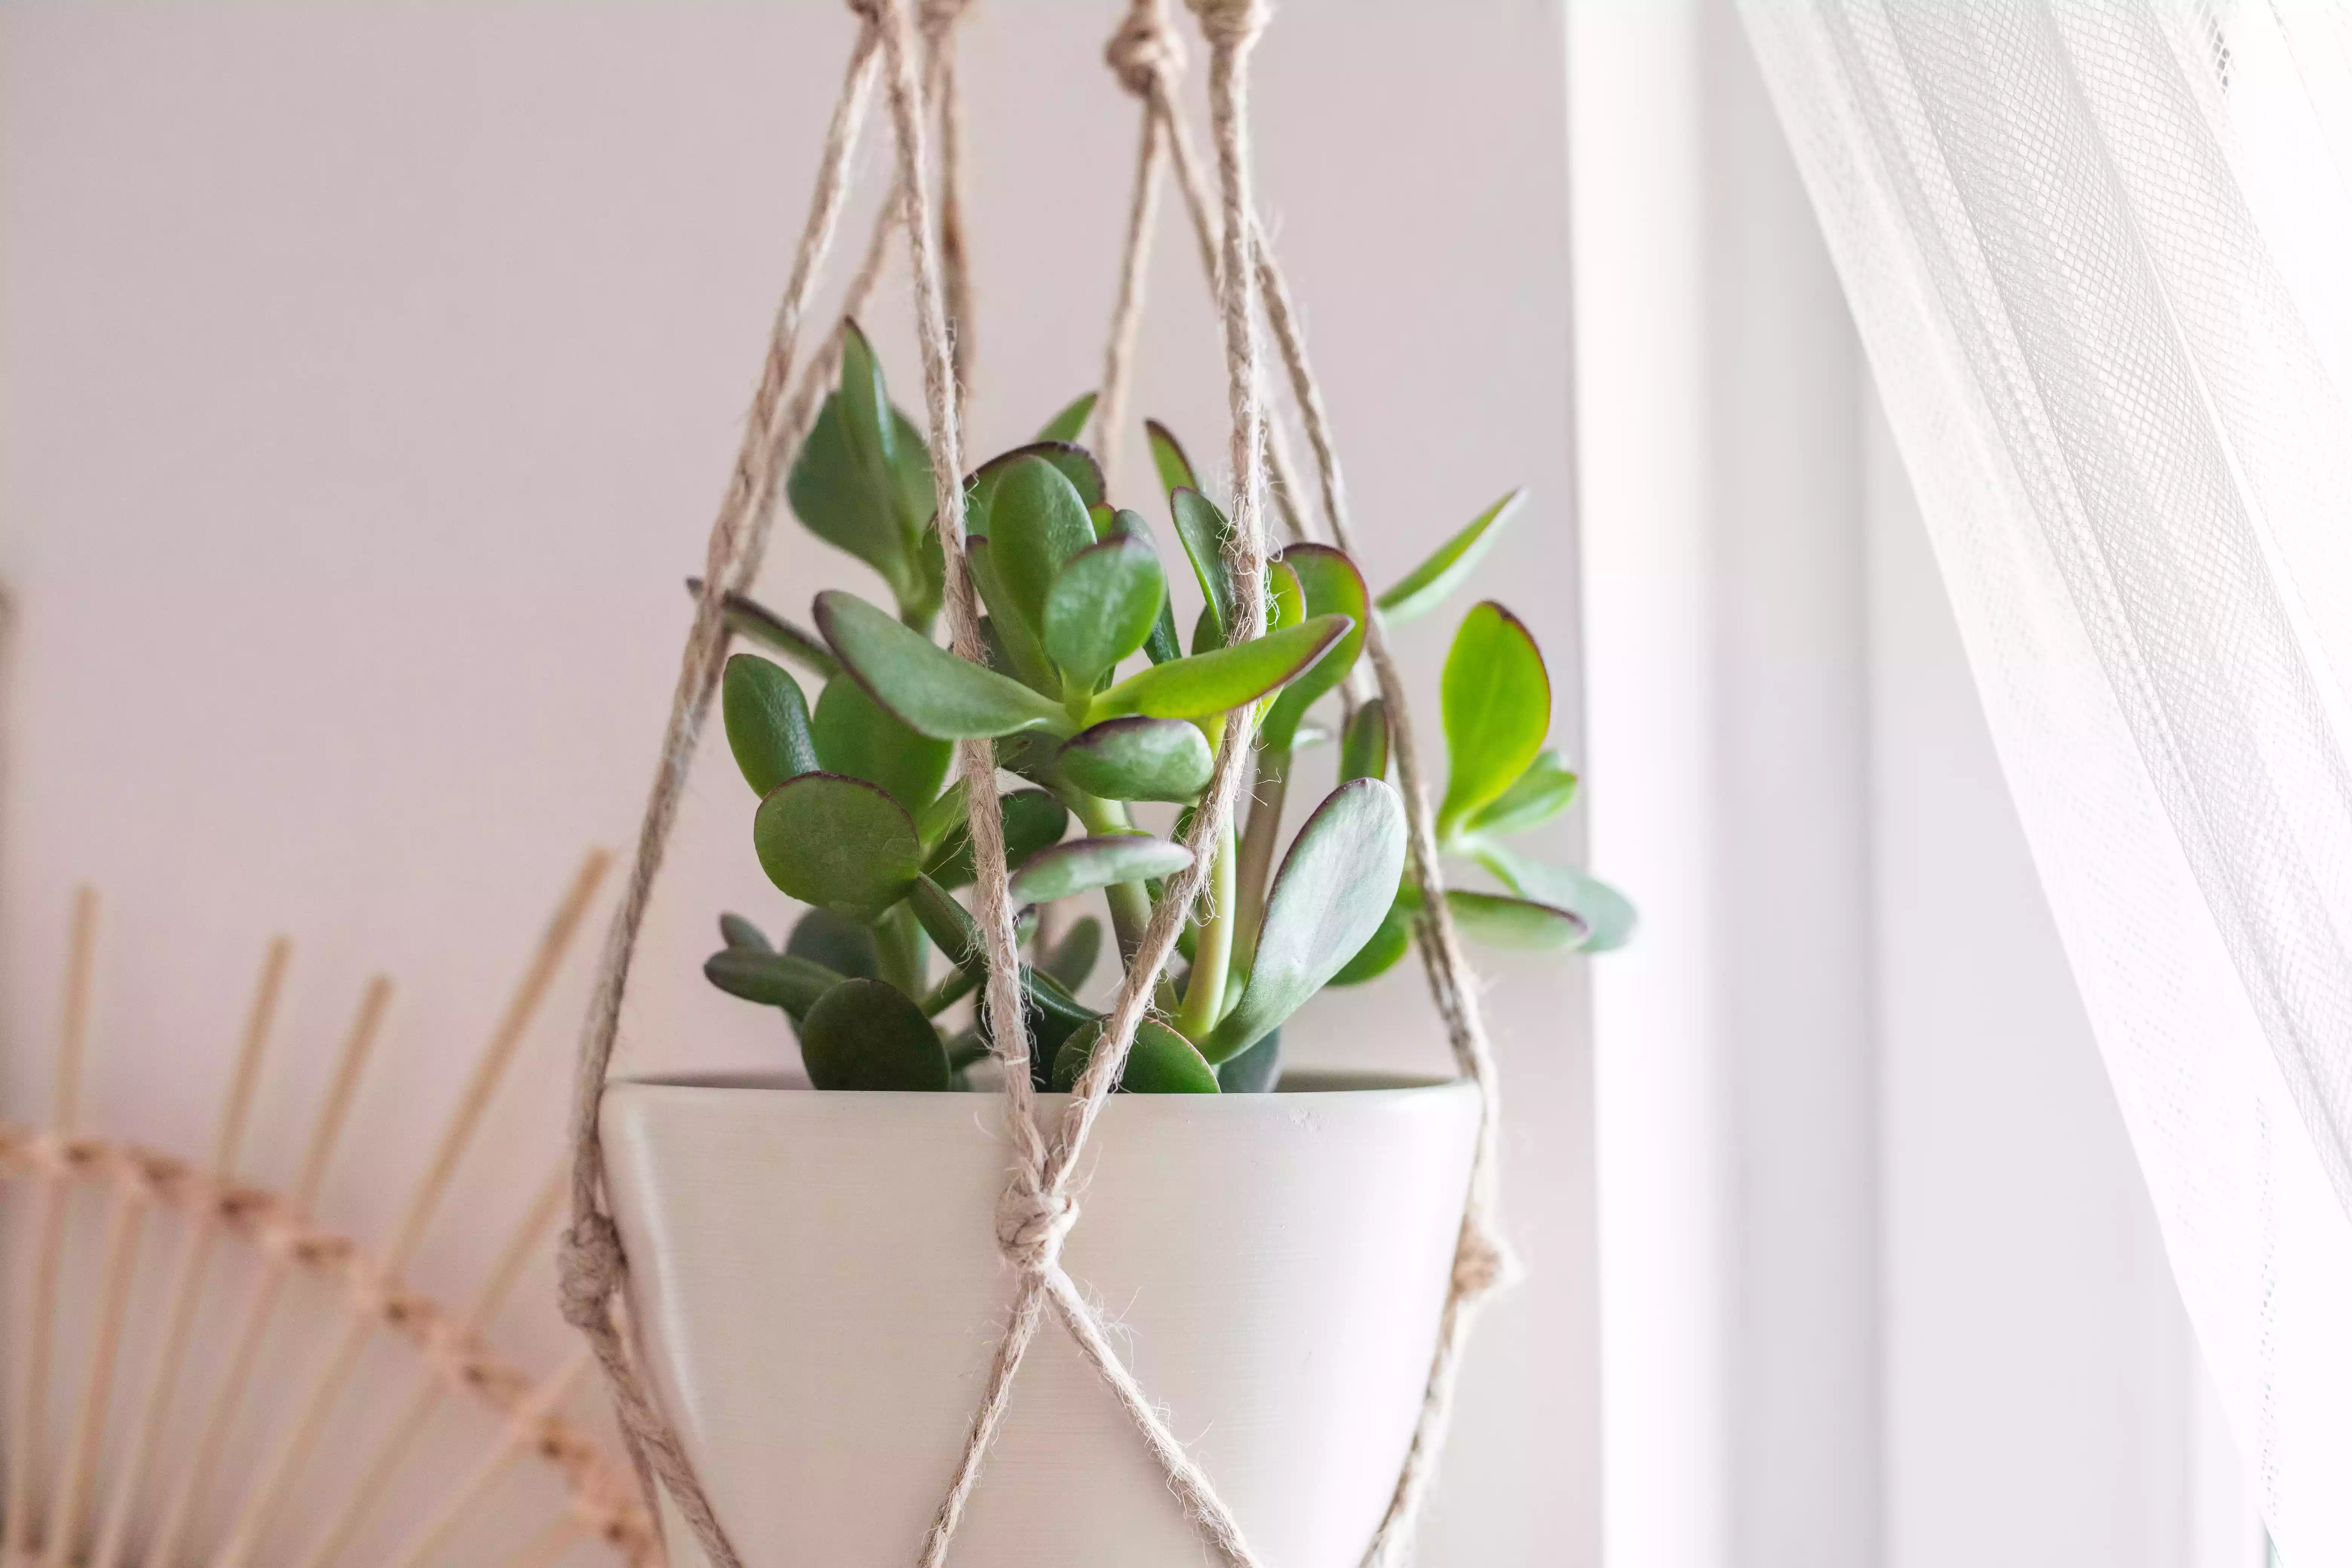 jade plant hangs from macrame holder near a window with sheer curtains